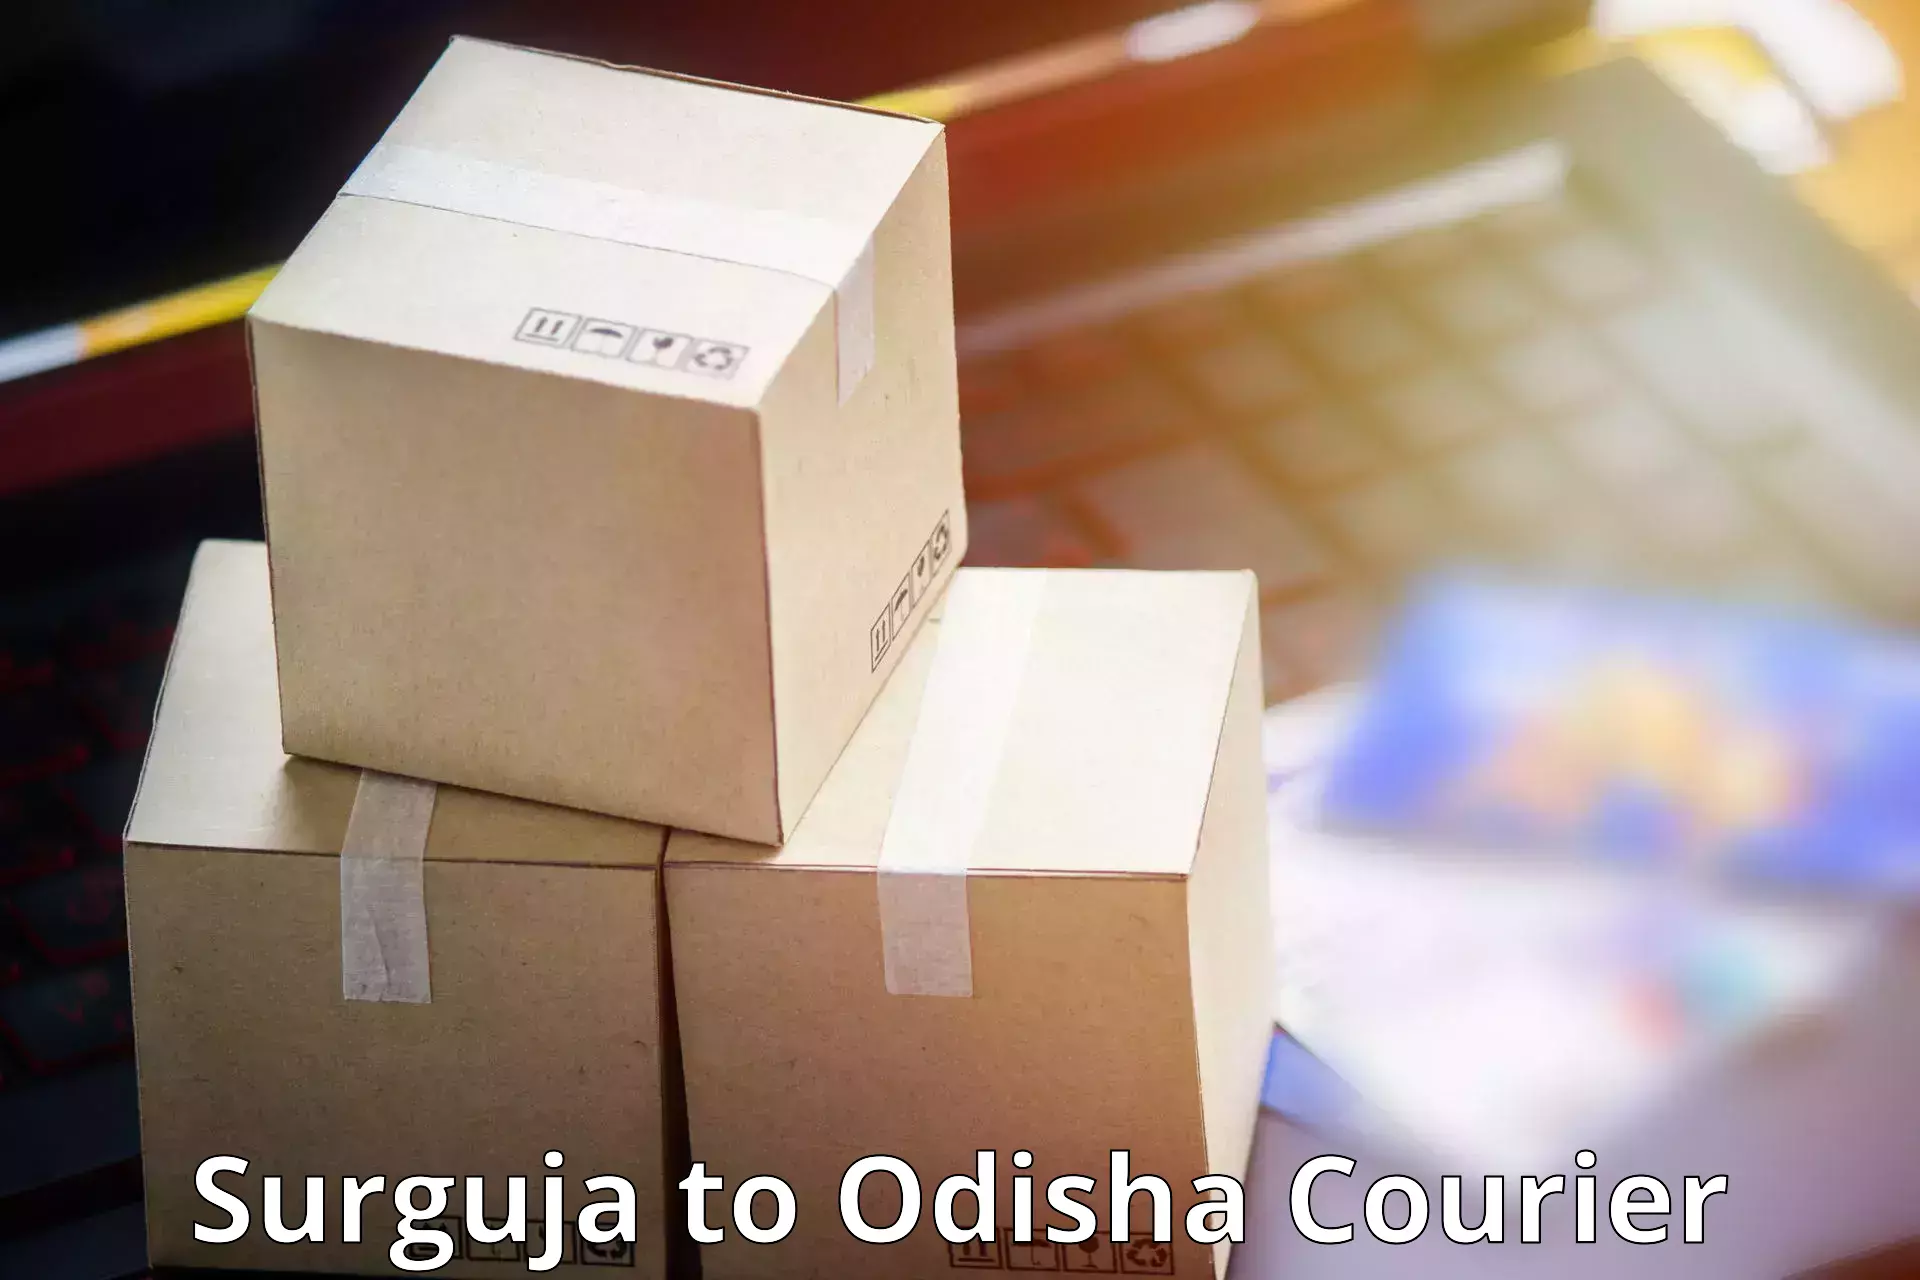 Parcel service for businesses Surguja to Dhamara